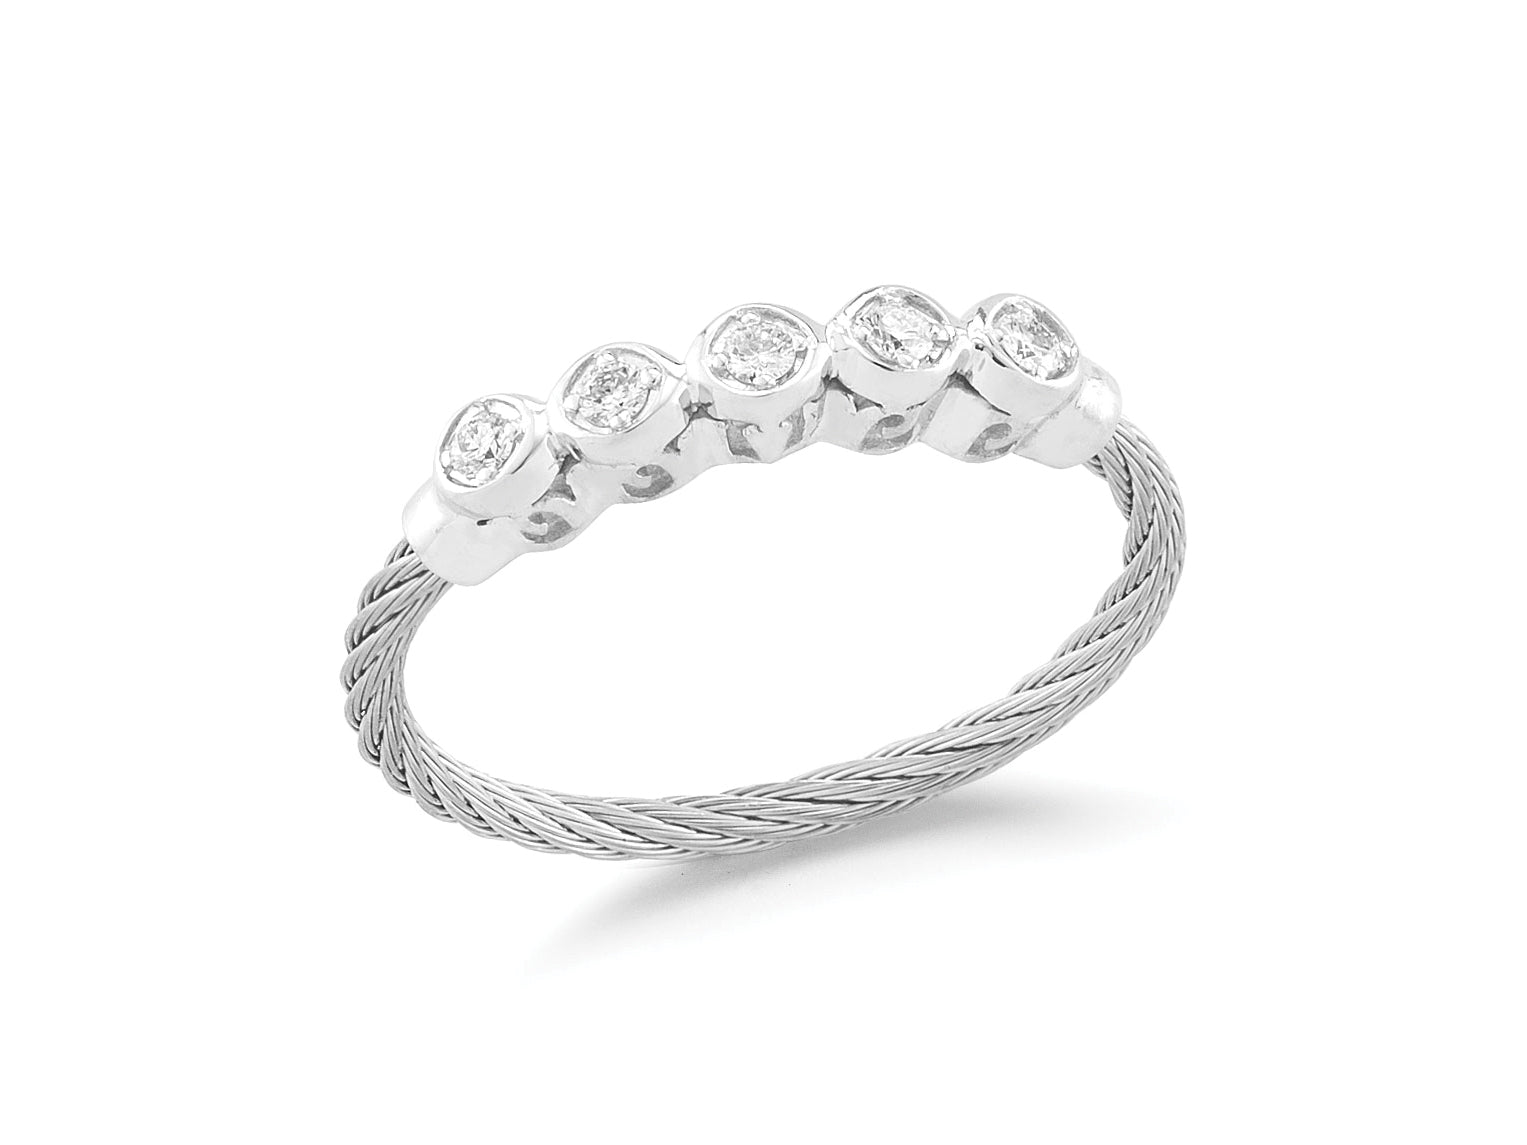 Alor Grey cable, 18 karat White Gold, 0.11 total carat weight Diamonds and stainless steel. Imported.